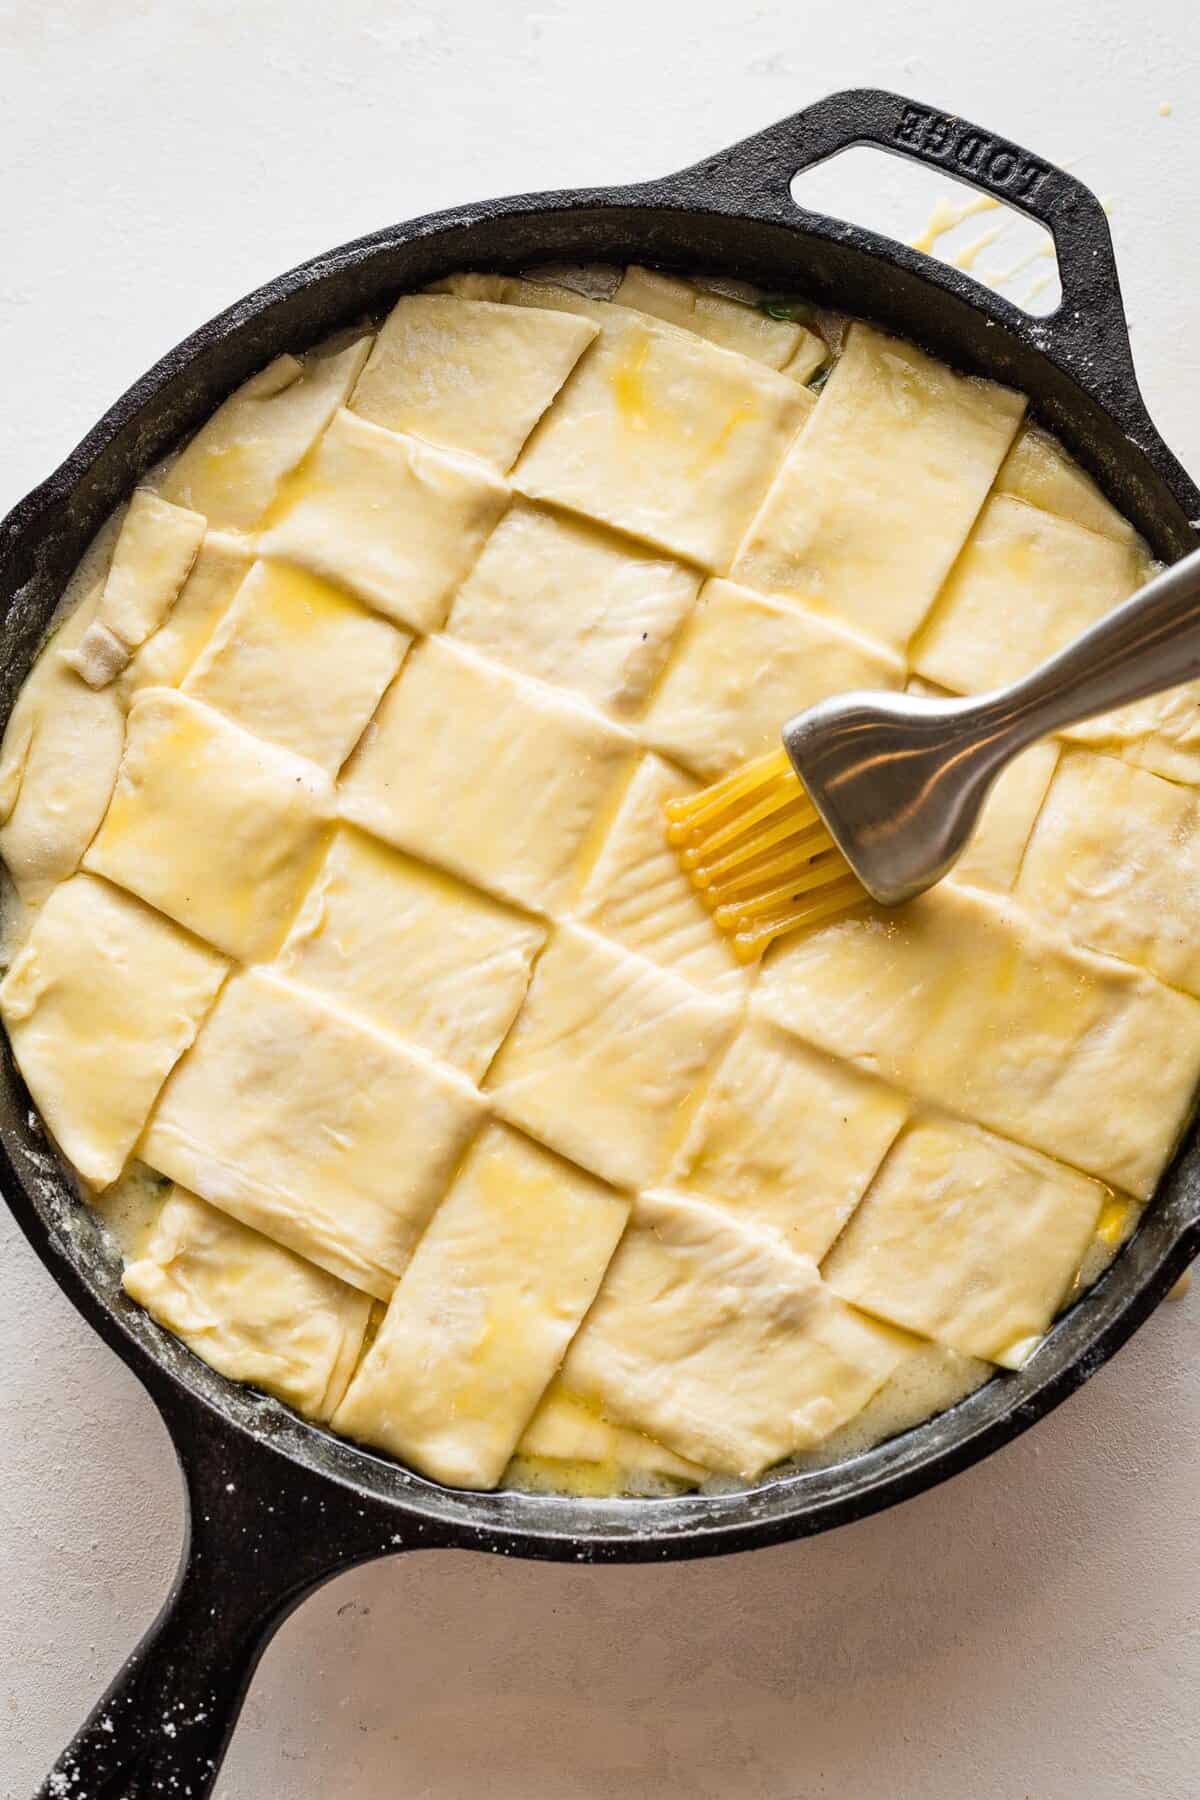 Butter being brushed over pastry of turkey pot pie.